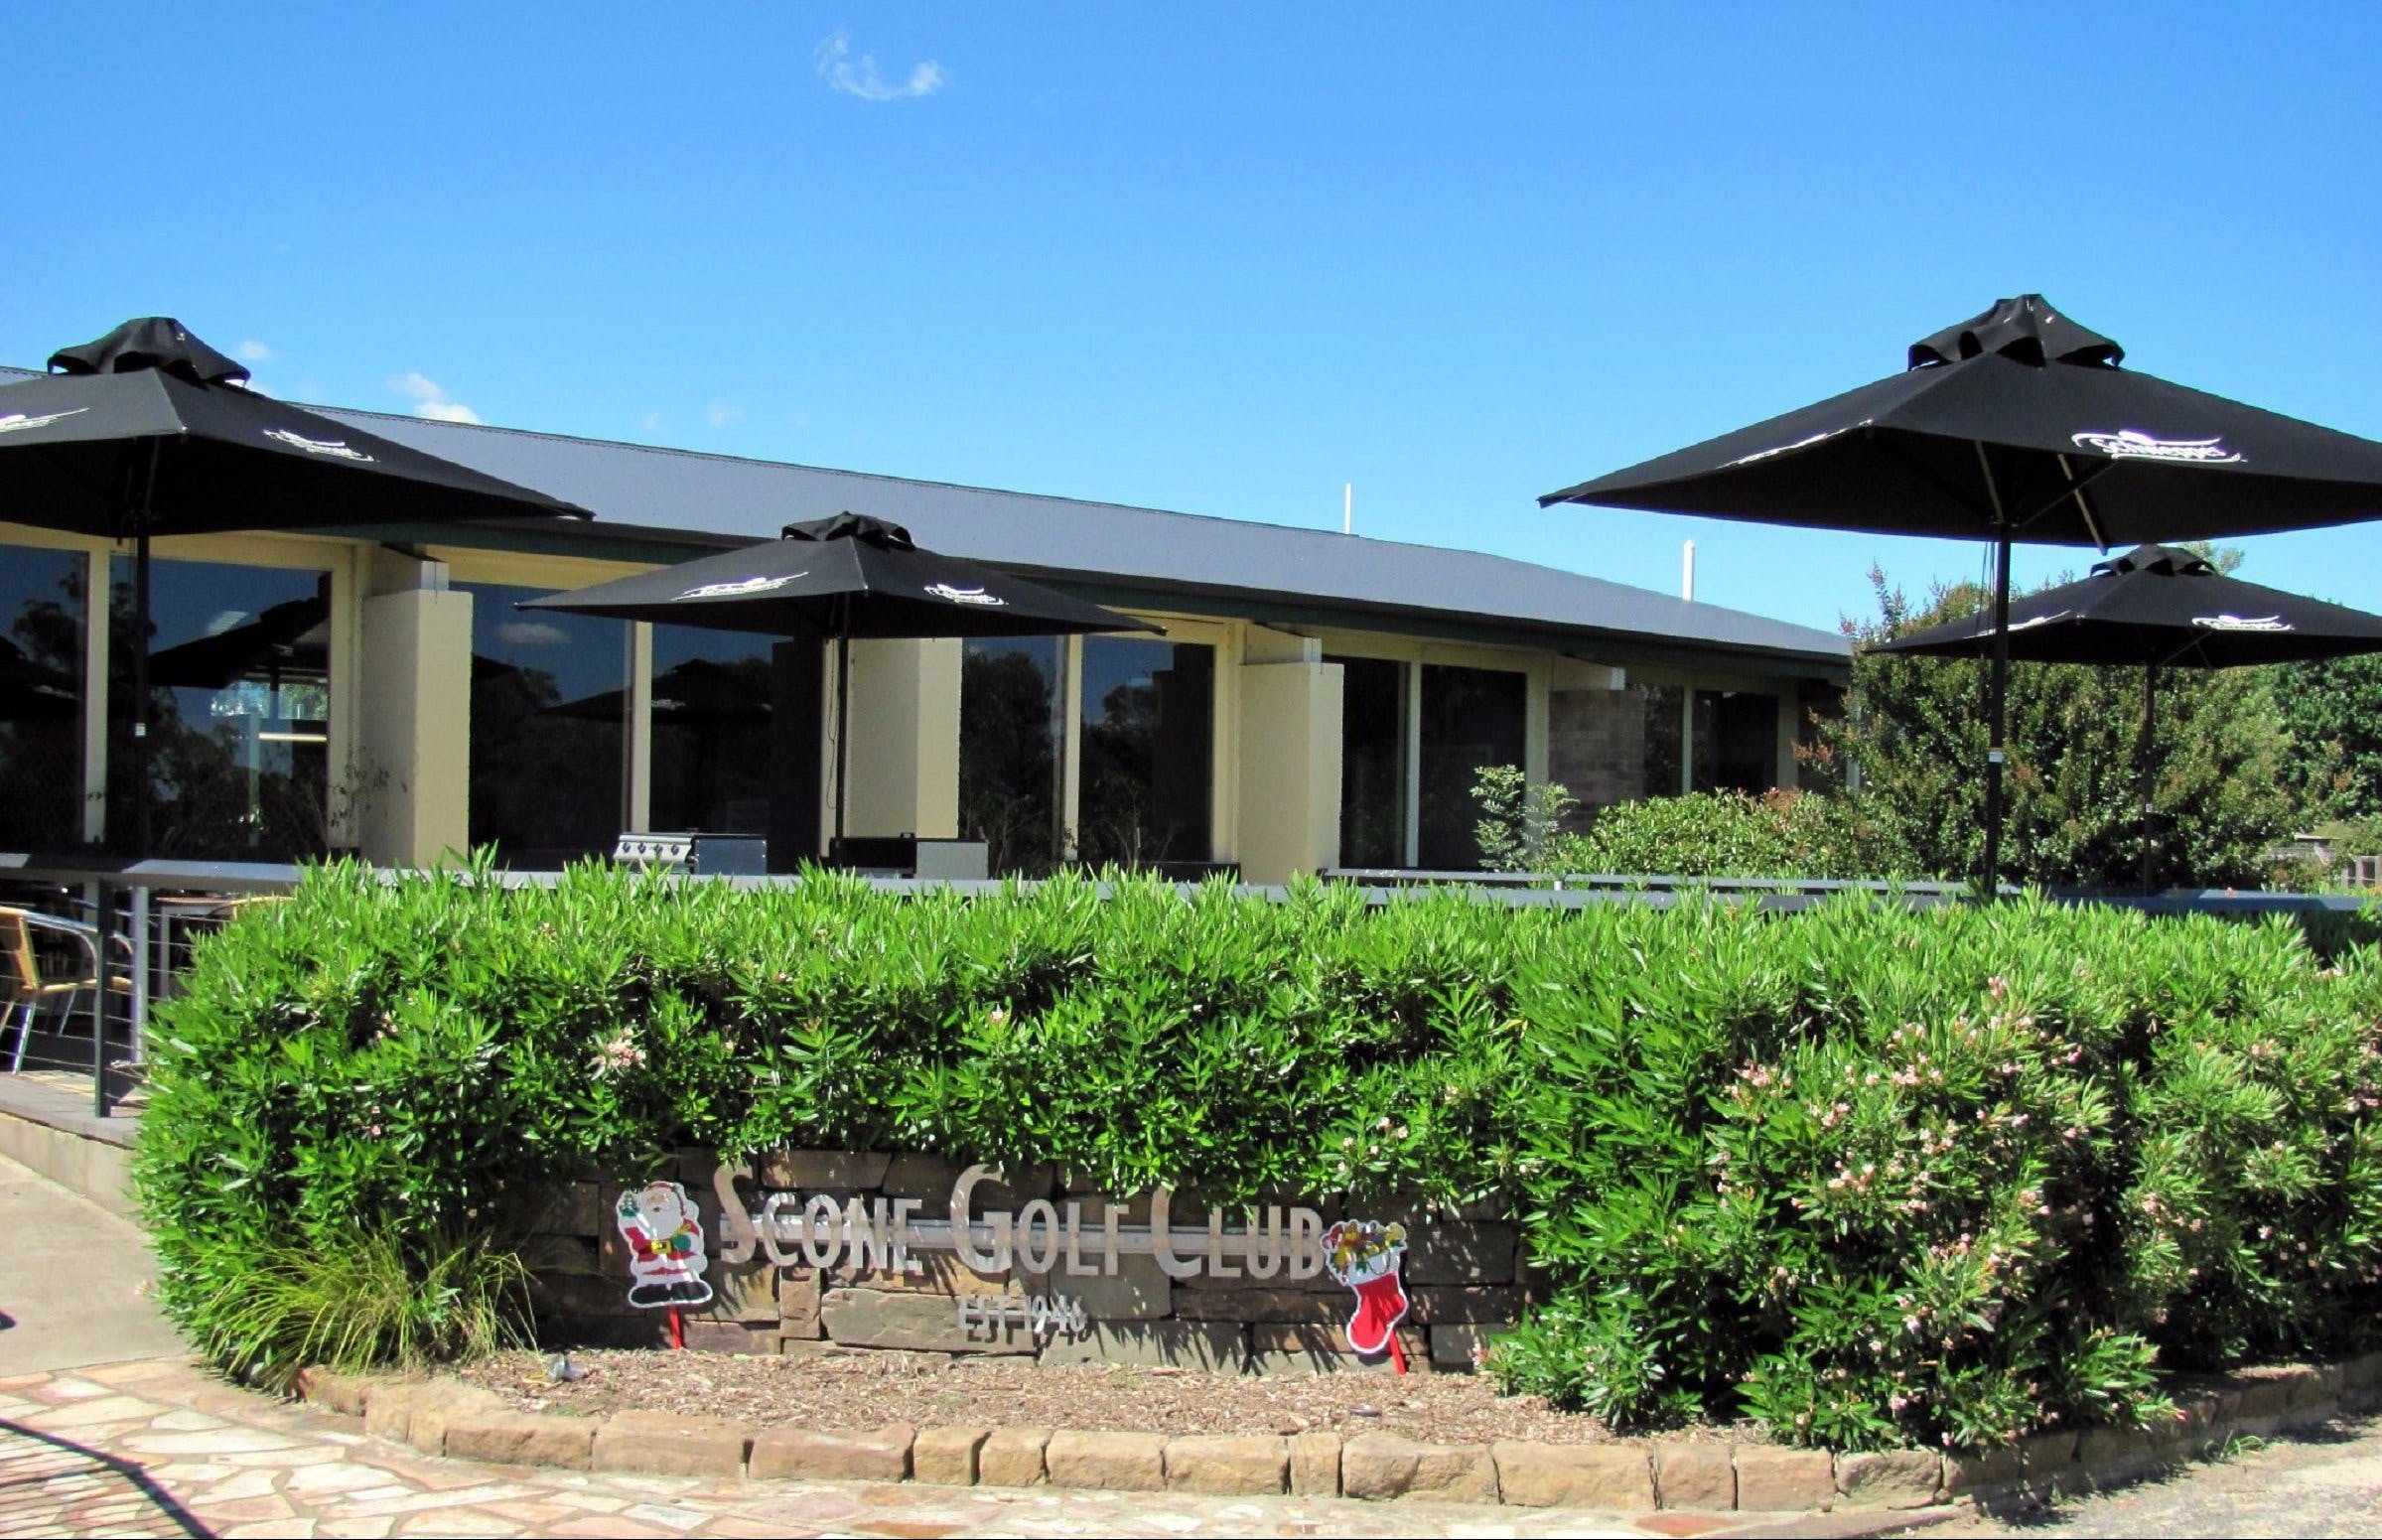 Scone Golf Club - Accommodation in Surfers Paradise